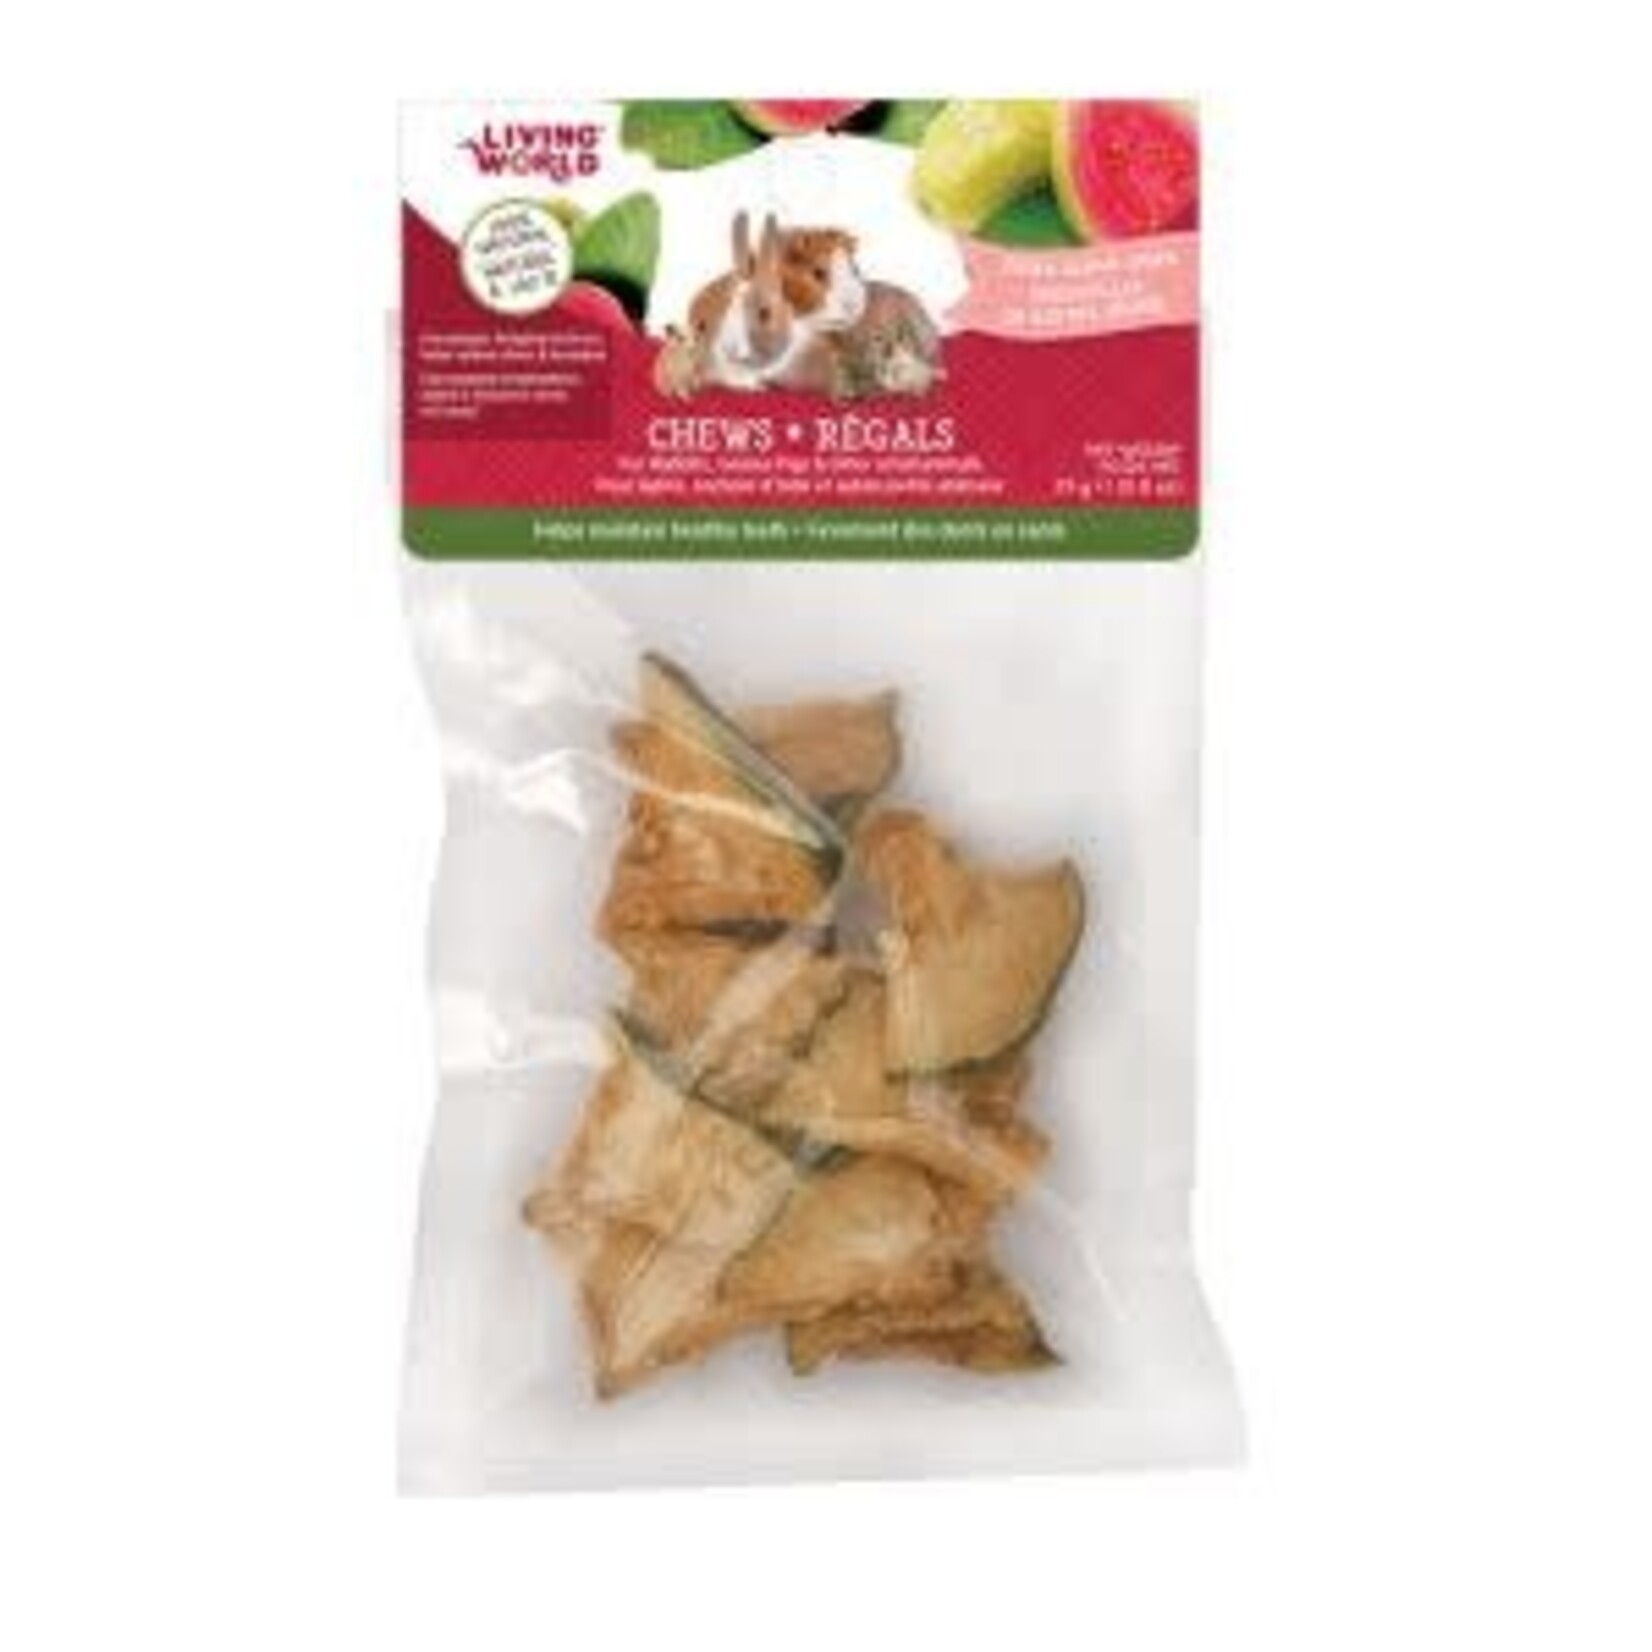 LIVING WORLD Living World Small Animal Chews - Guava Chips- 10 pieces